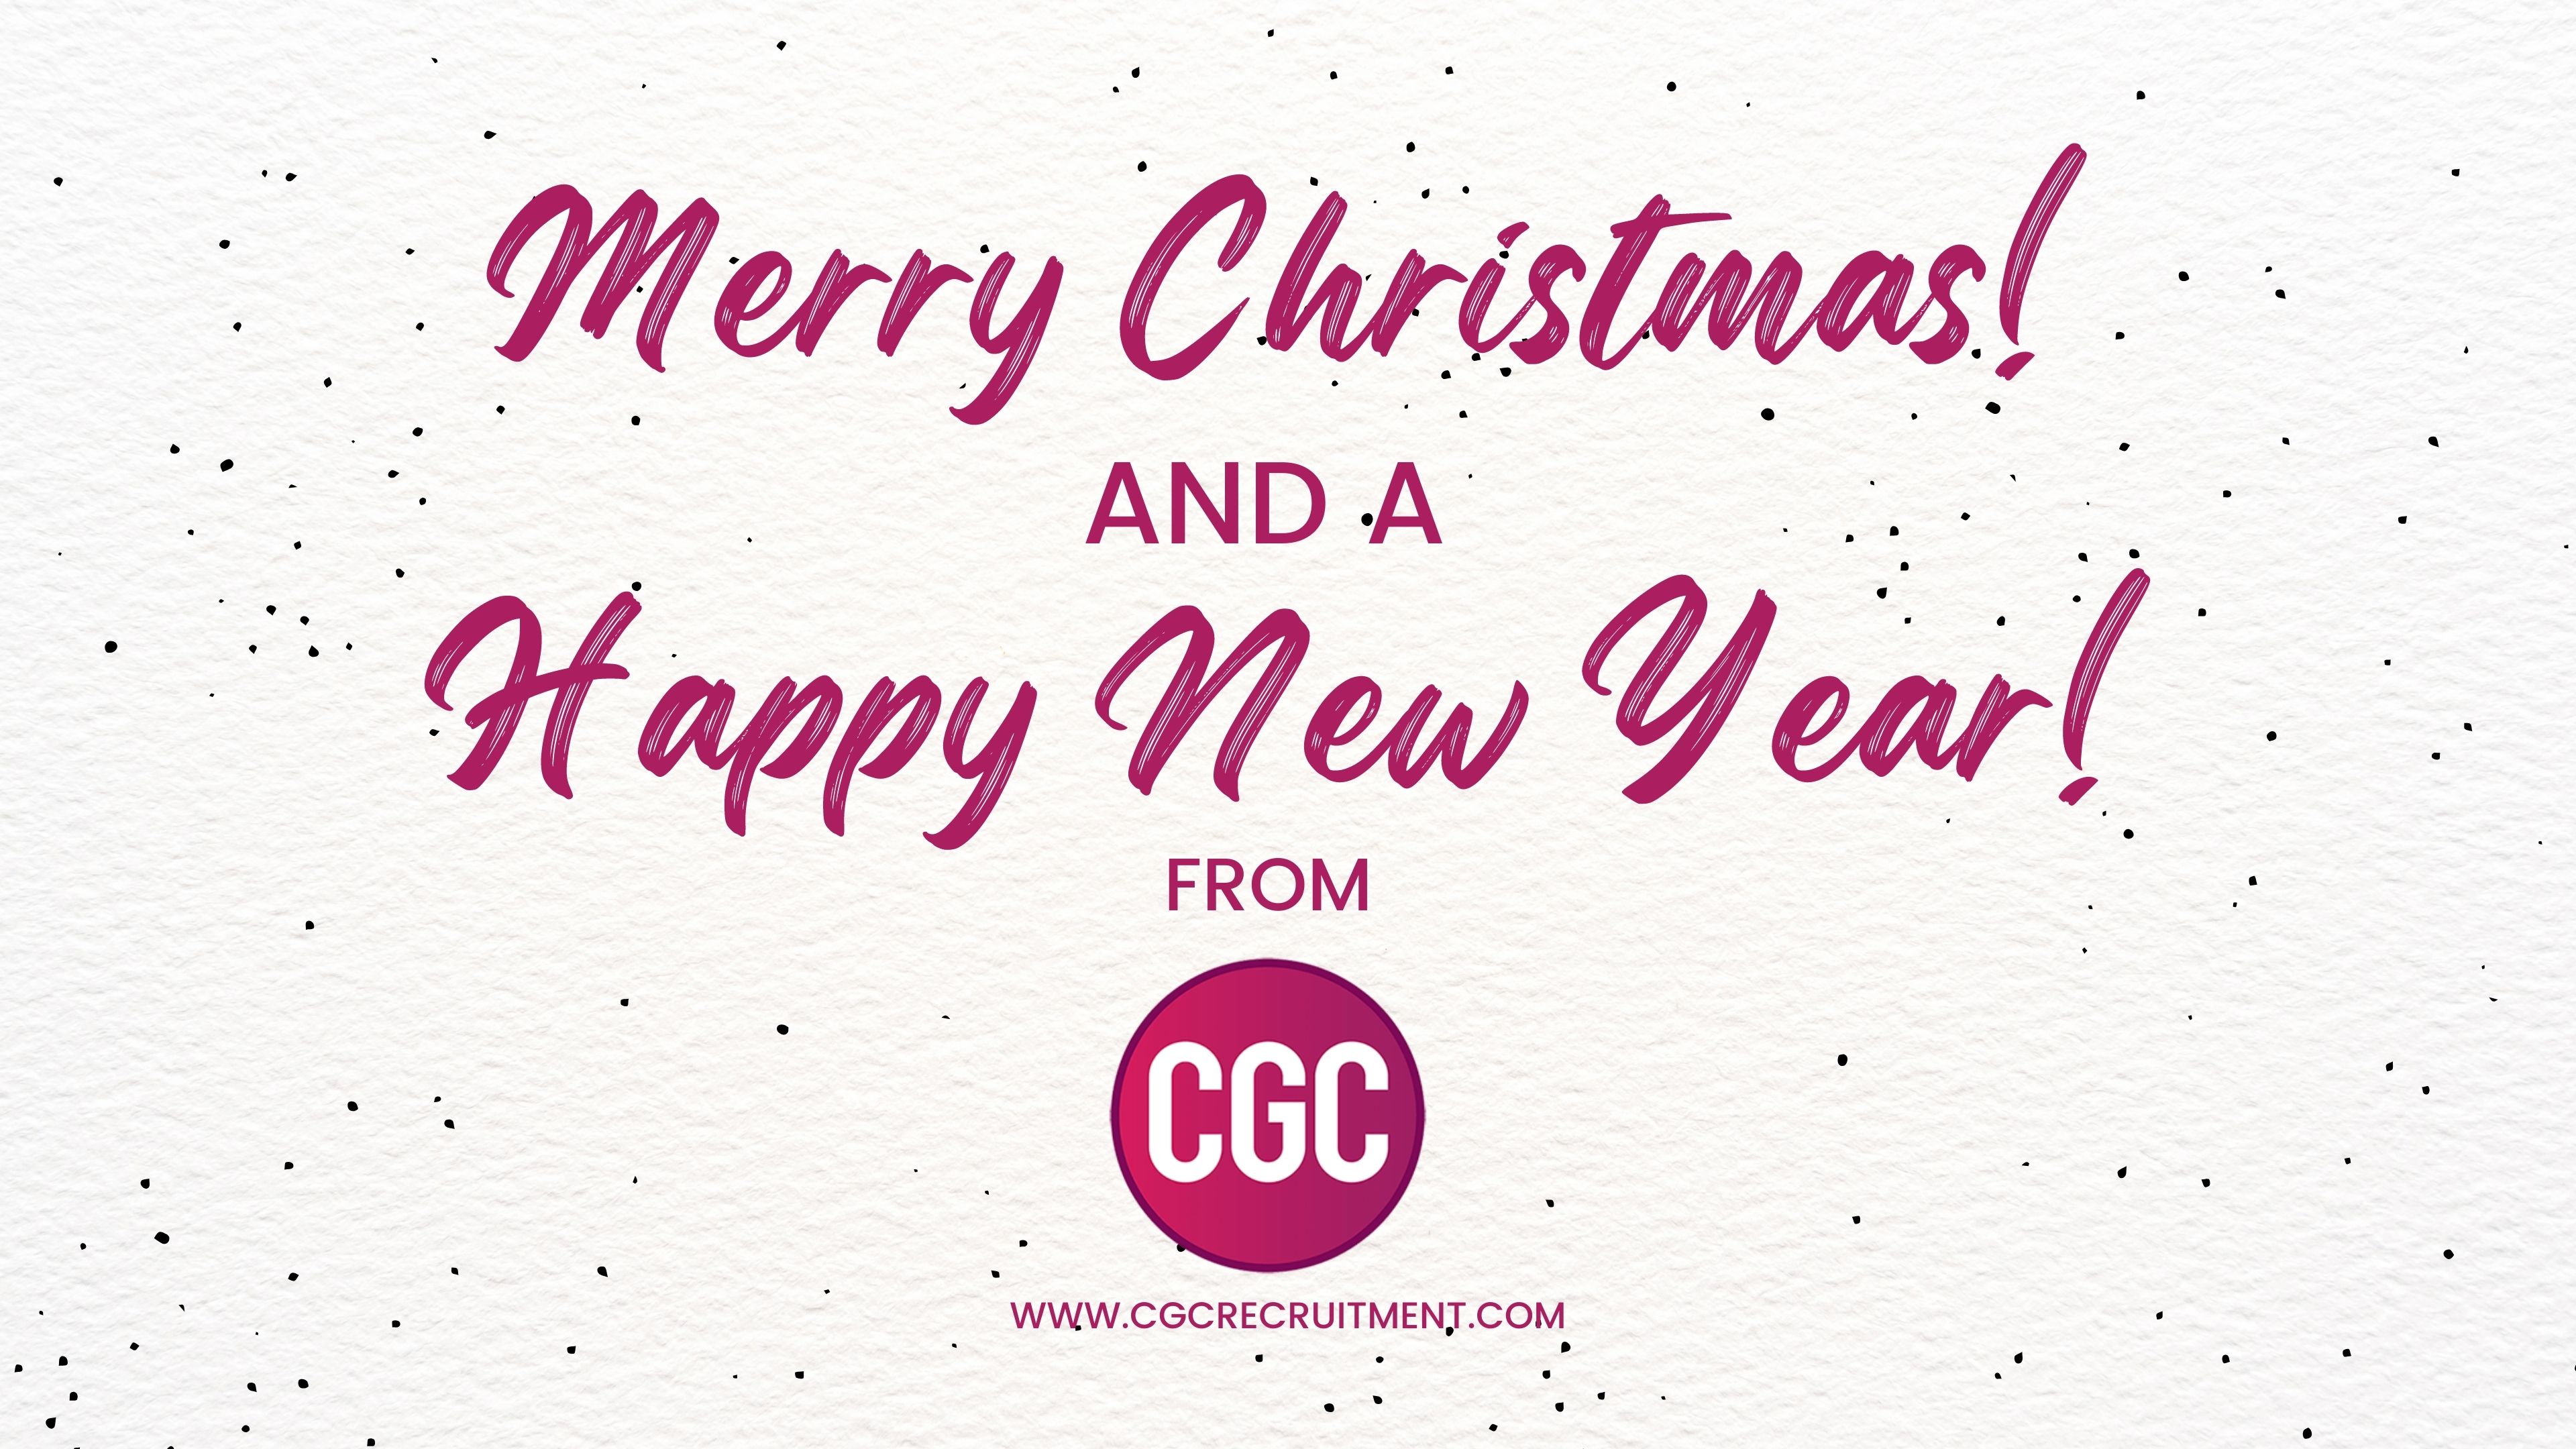 2021 Holiday Message from CGC Recruitment